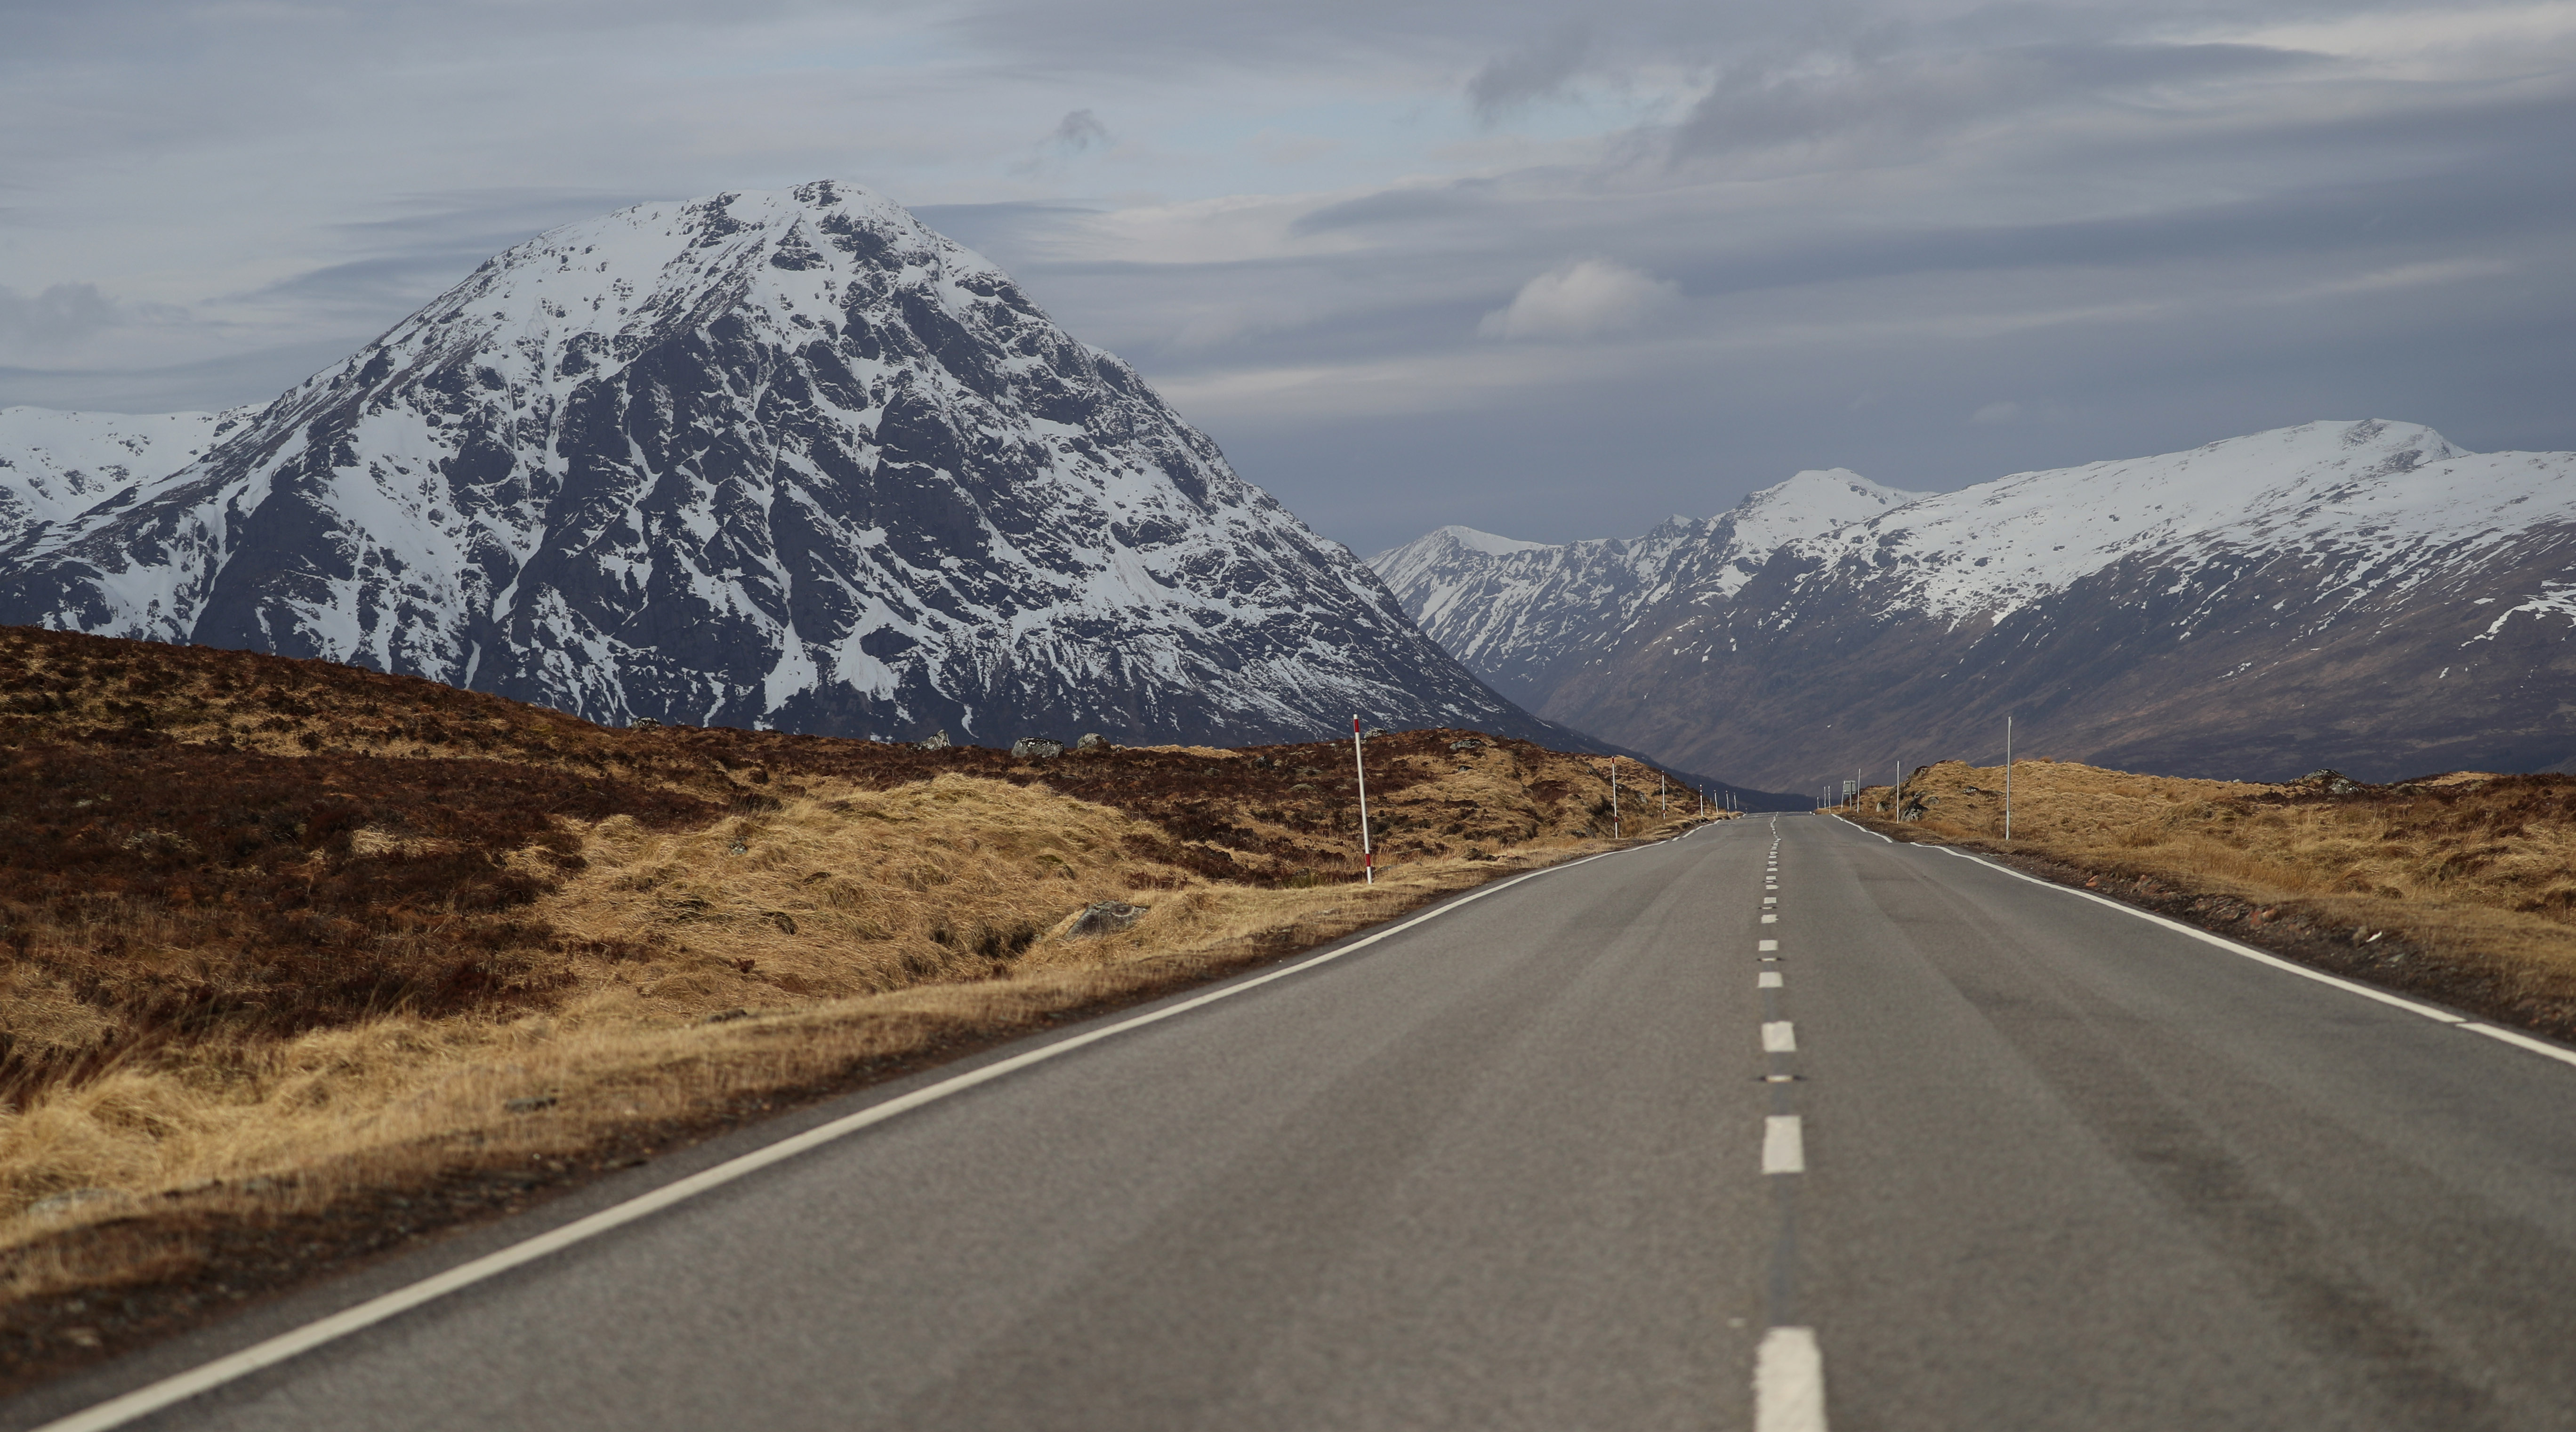 The A82 road leads to Buachaille Etive Mor